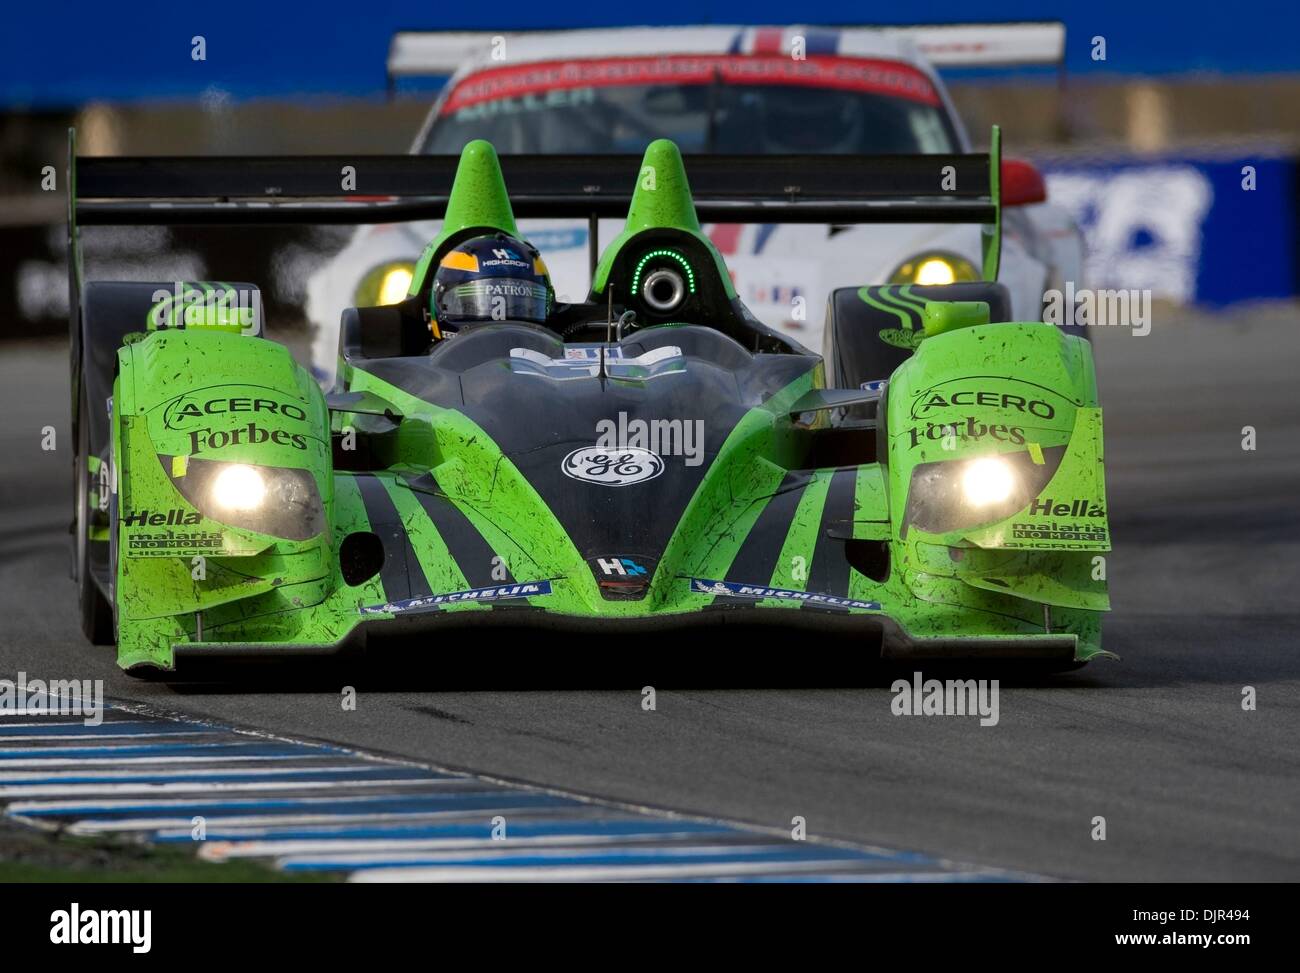 May 22, 2010 - Monterey, California, USA - Patron Highcroft Racing (PHR) scored an exhausting victory in the American Le Mans Series presented by Tequila Patron. The HPD ARX-01c of David Brabham, Simon Pagenaud and Marino Franchitti won an epic six-hour race at Mazda (Credit Image: Â© William Mancebo/ZUMApress.com) Stock Photo